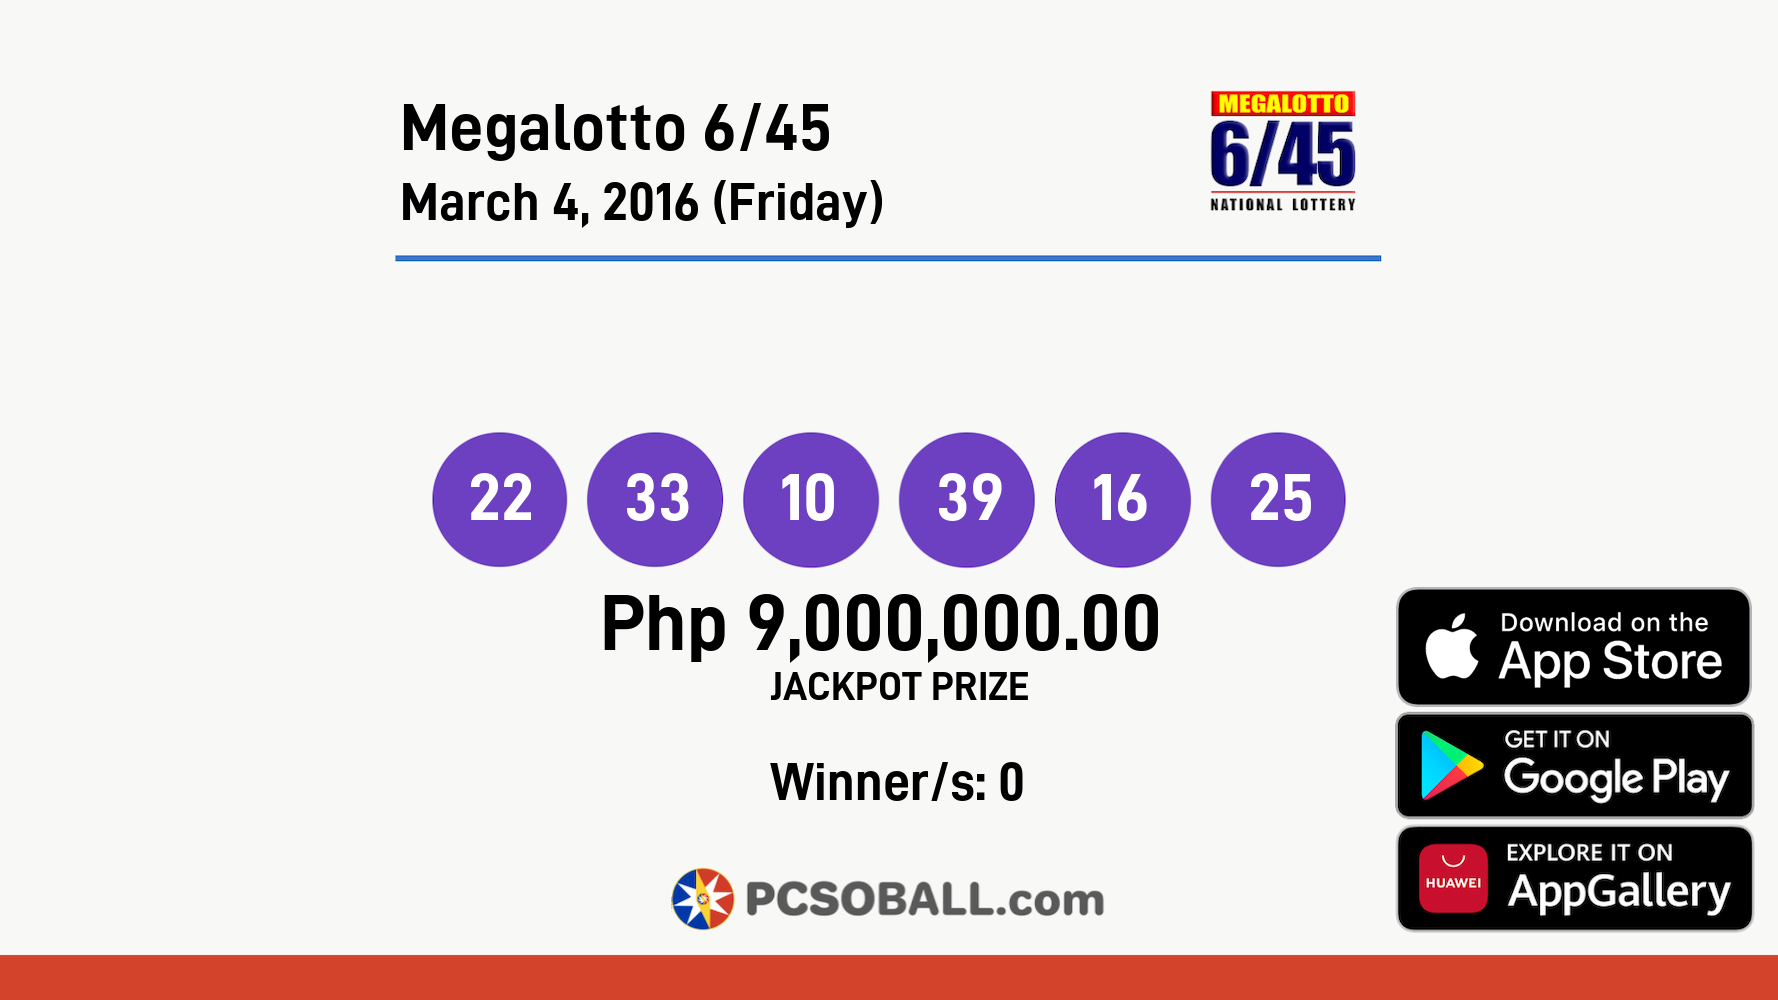 Megalotto 6/45 March 4, 2016 (Friday) Result